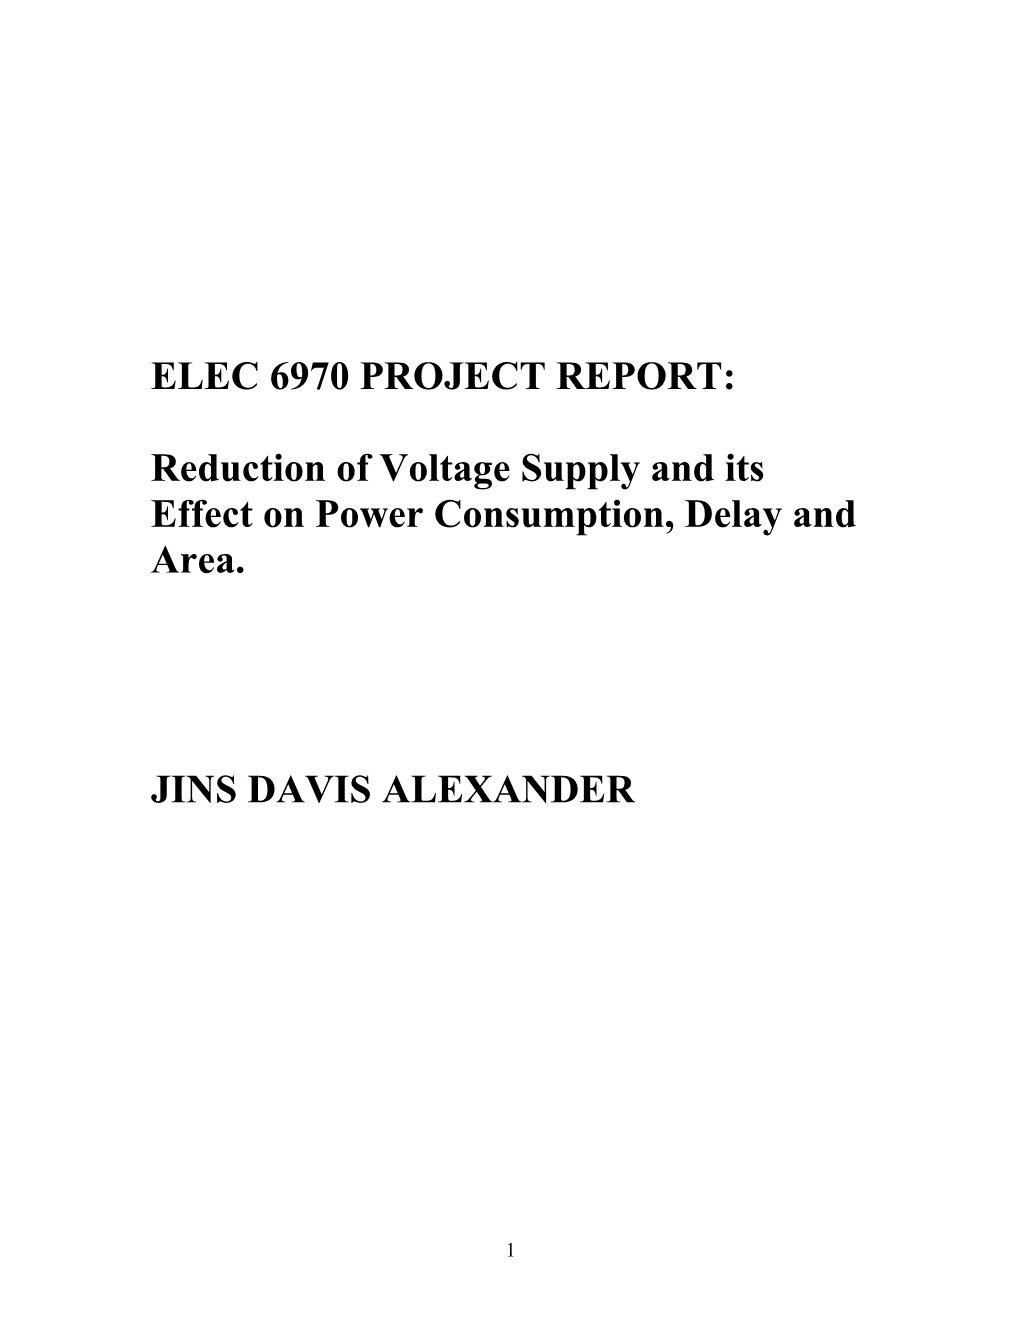 Reduction of Voltage Supply and Its Effect on Power Consumption, Delay and Area